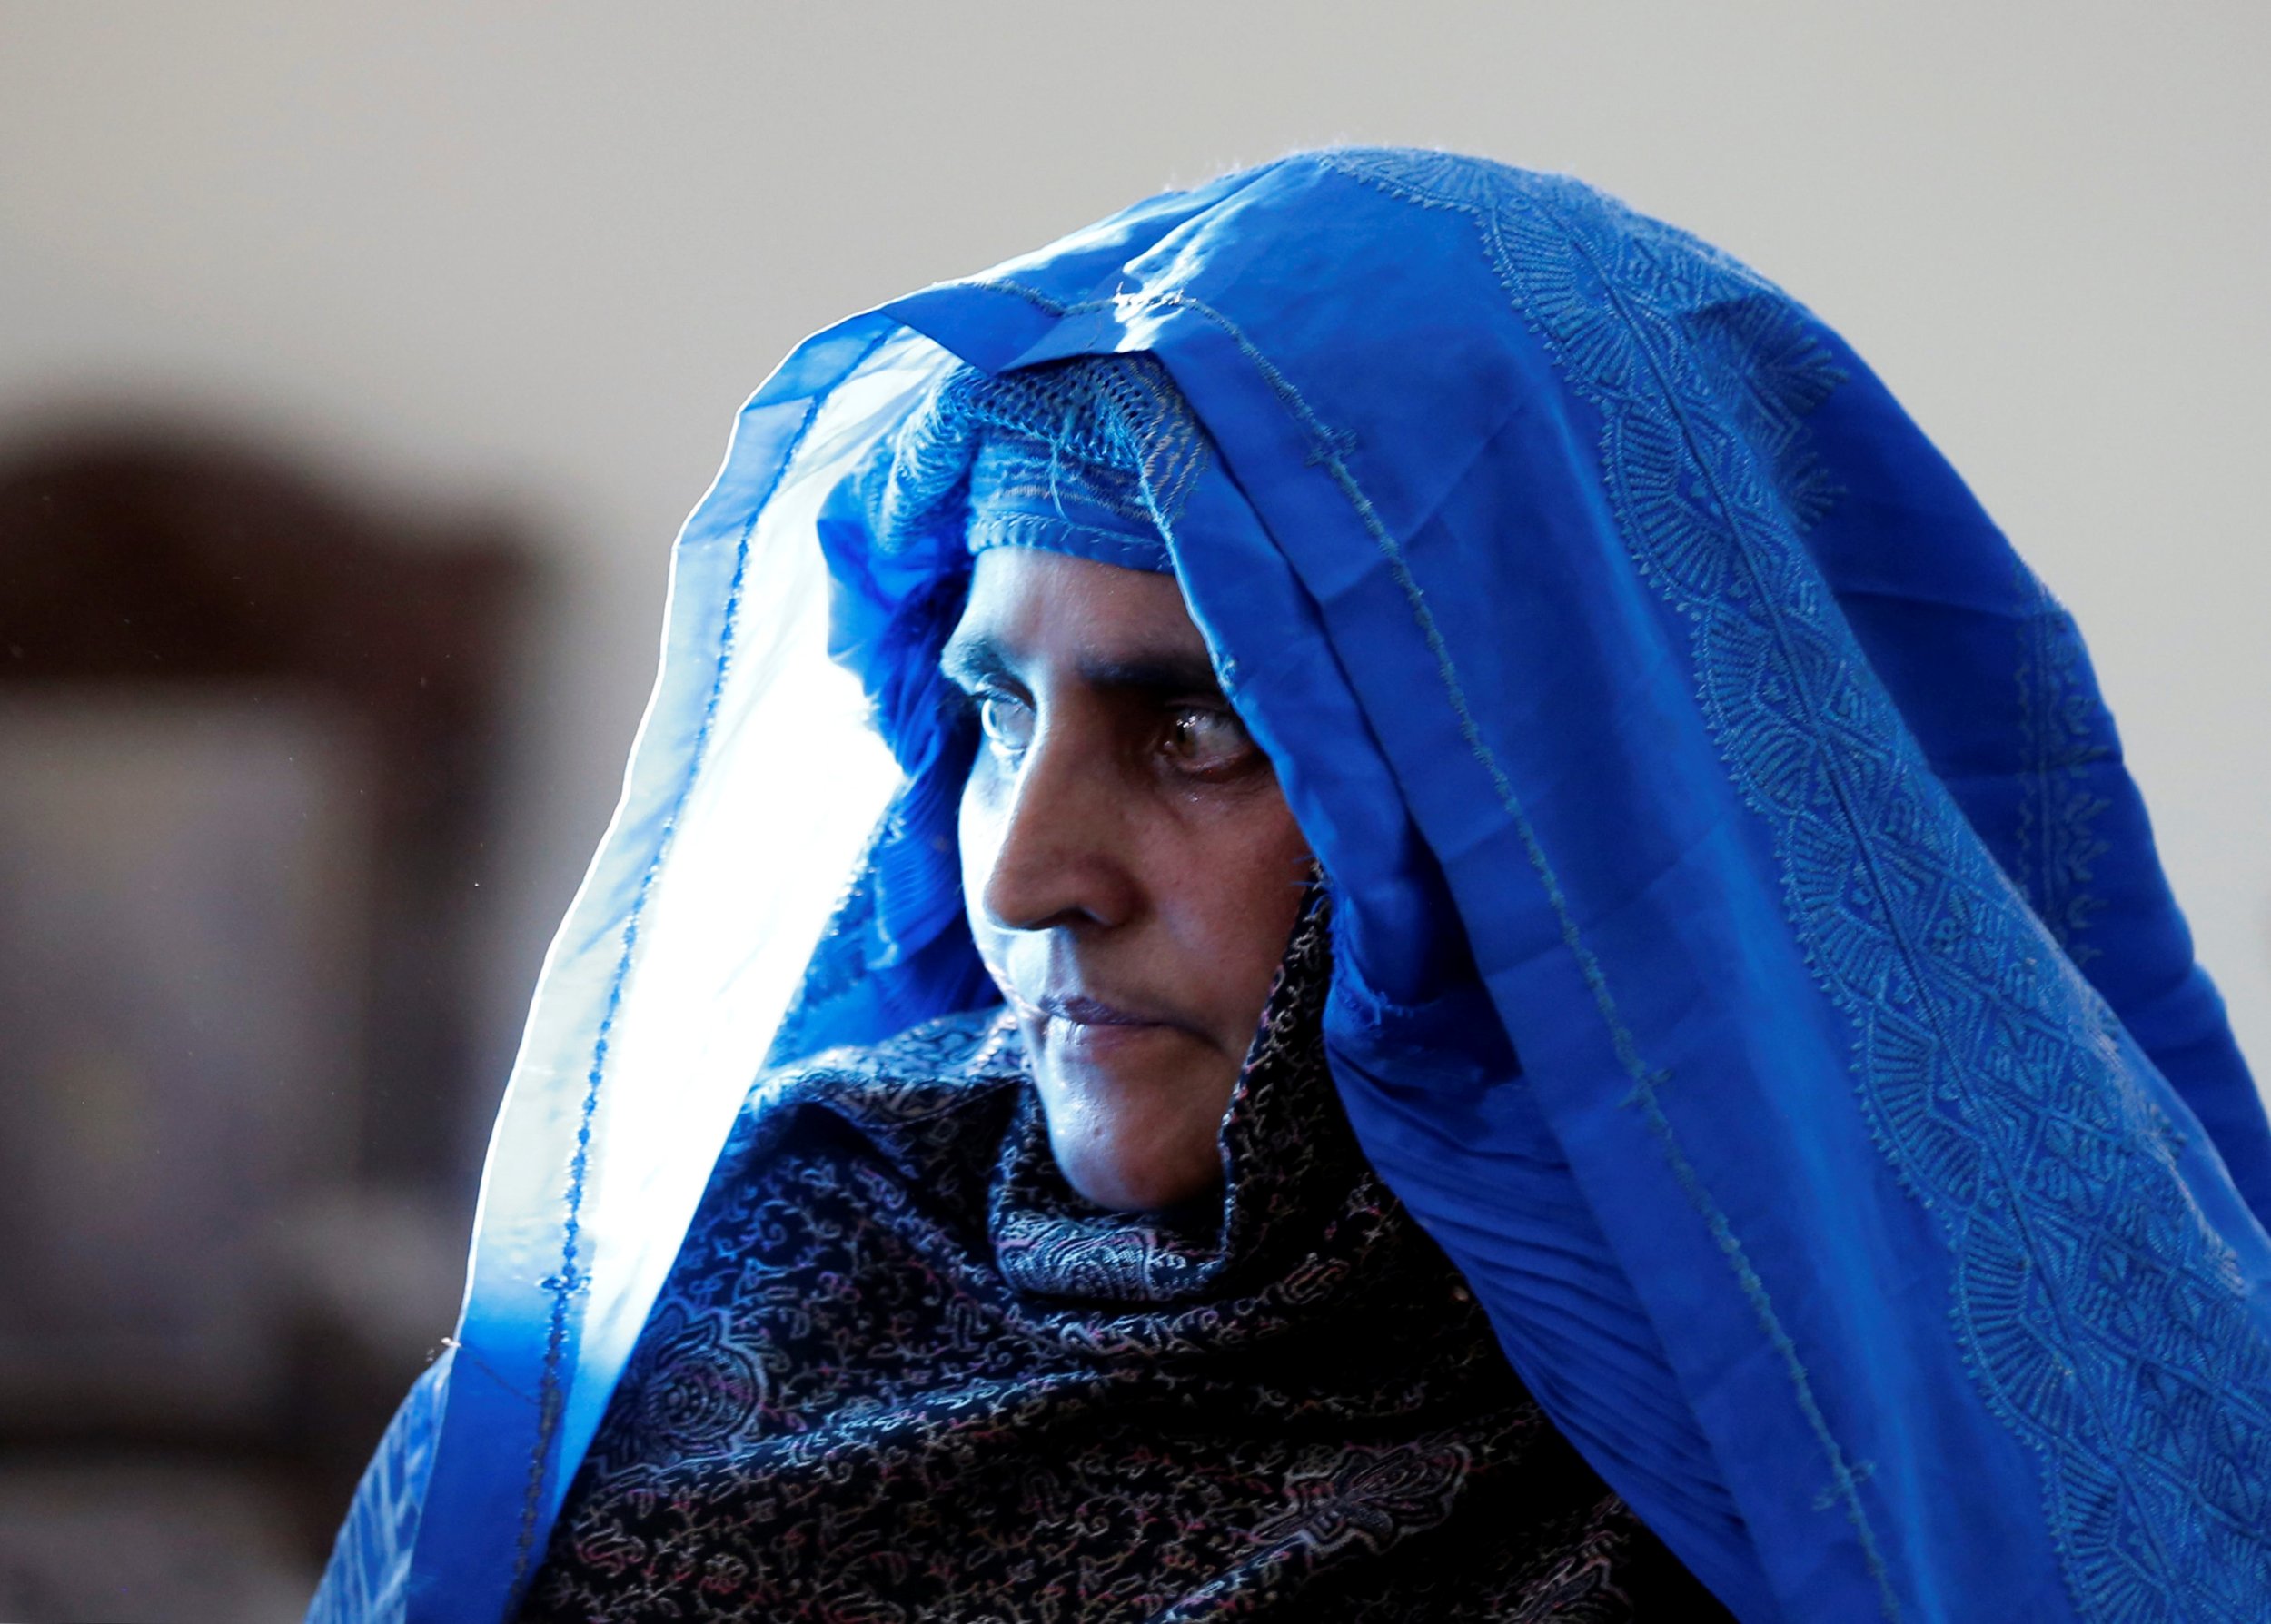 Green Eyed Afghan Girl From Famous National Geographic Cover Flees Taliban Given Refuge In 